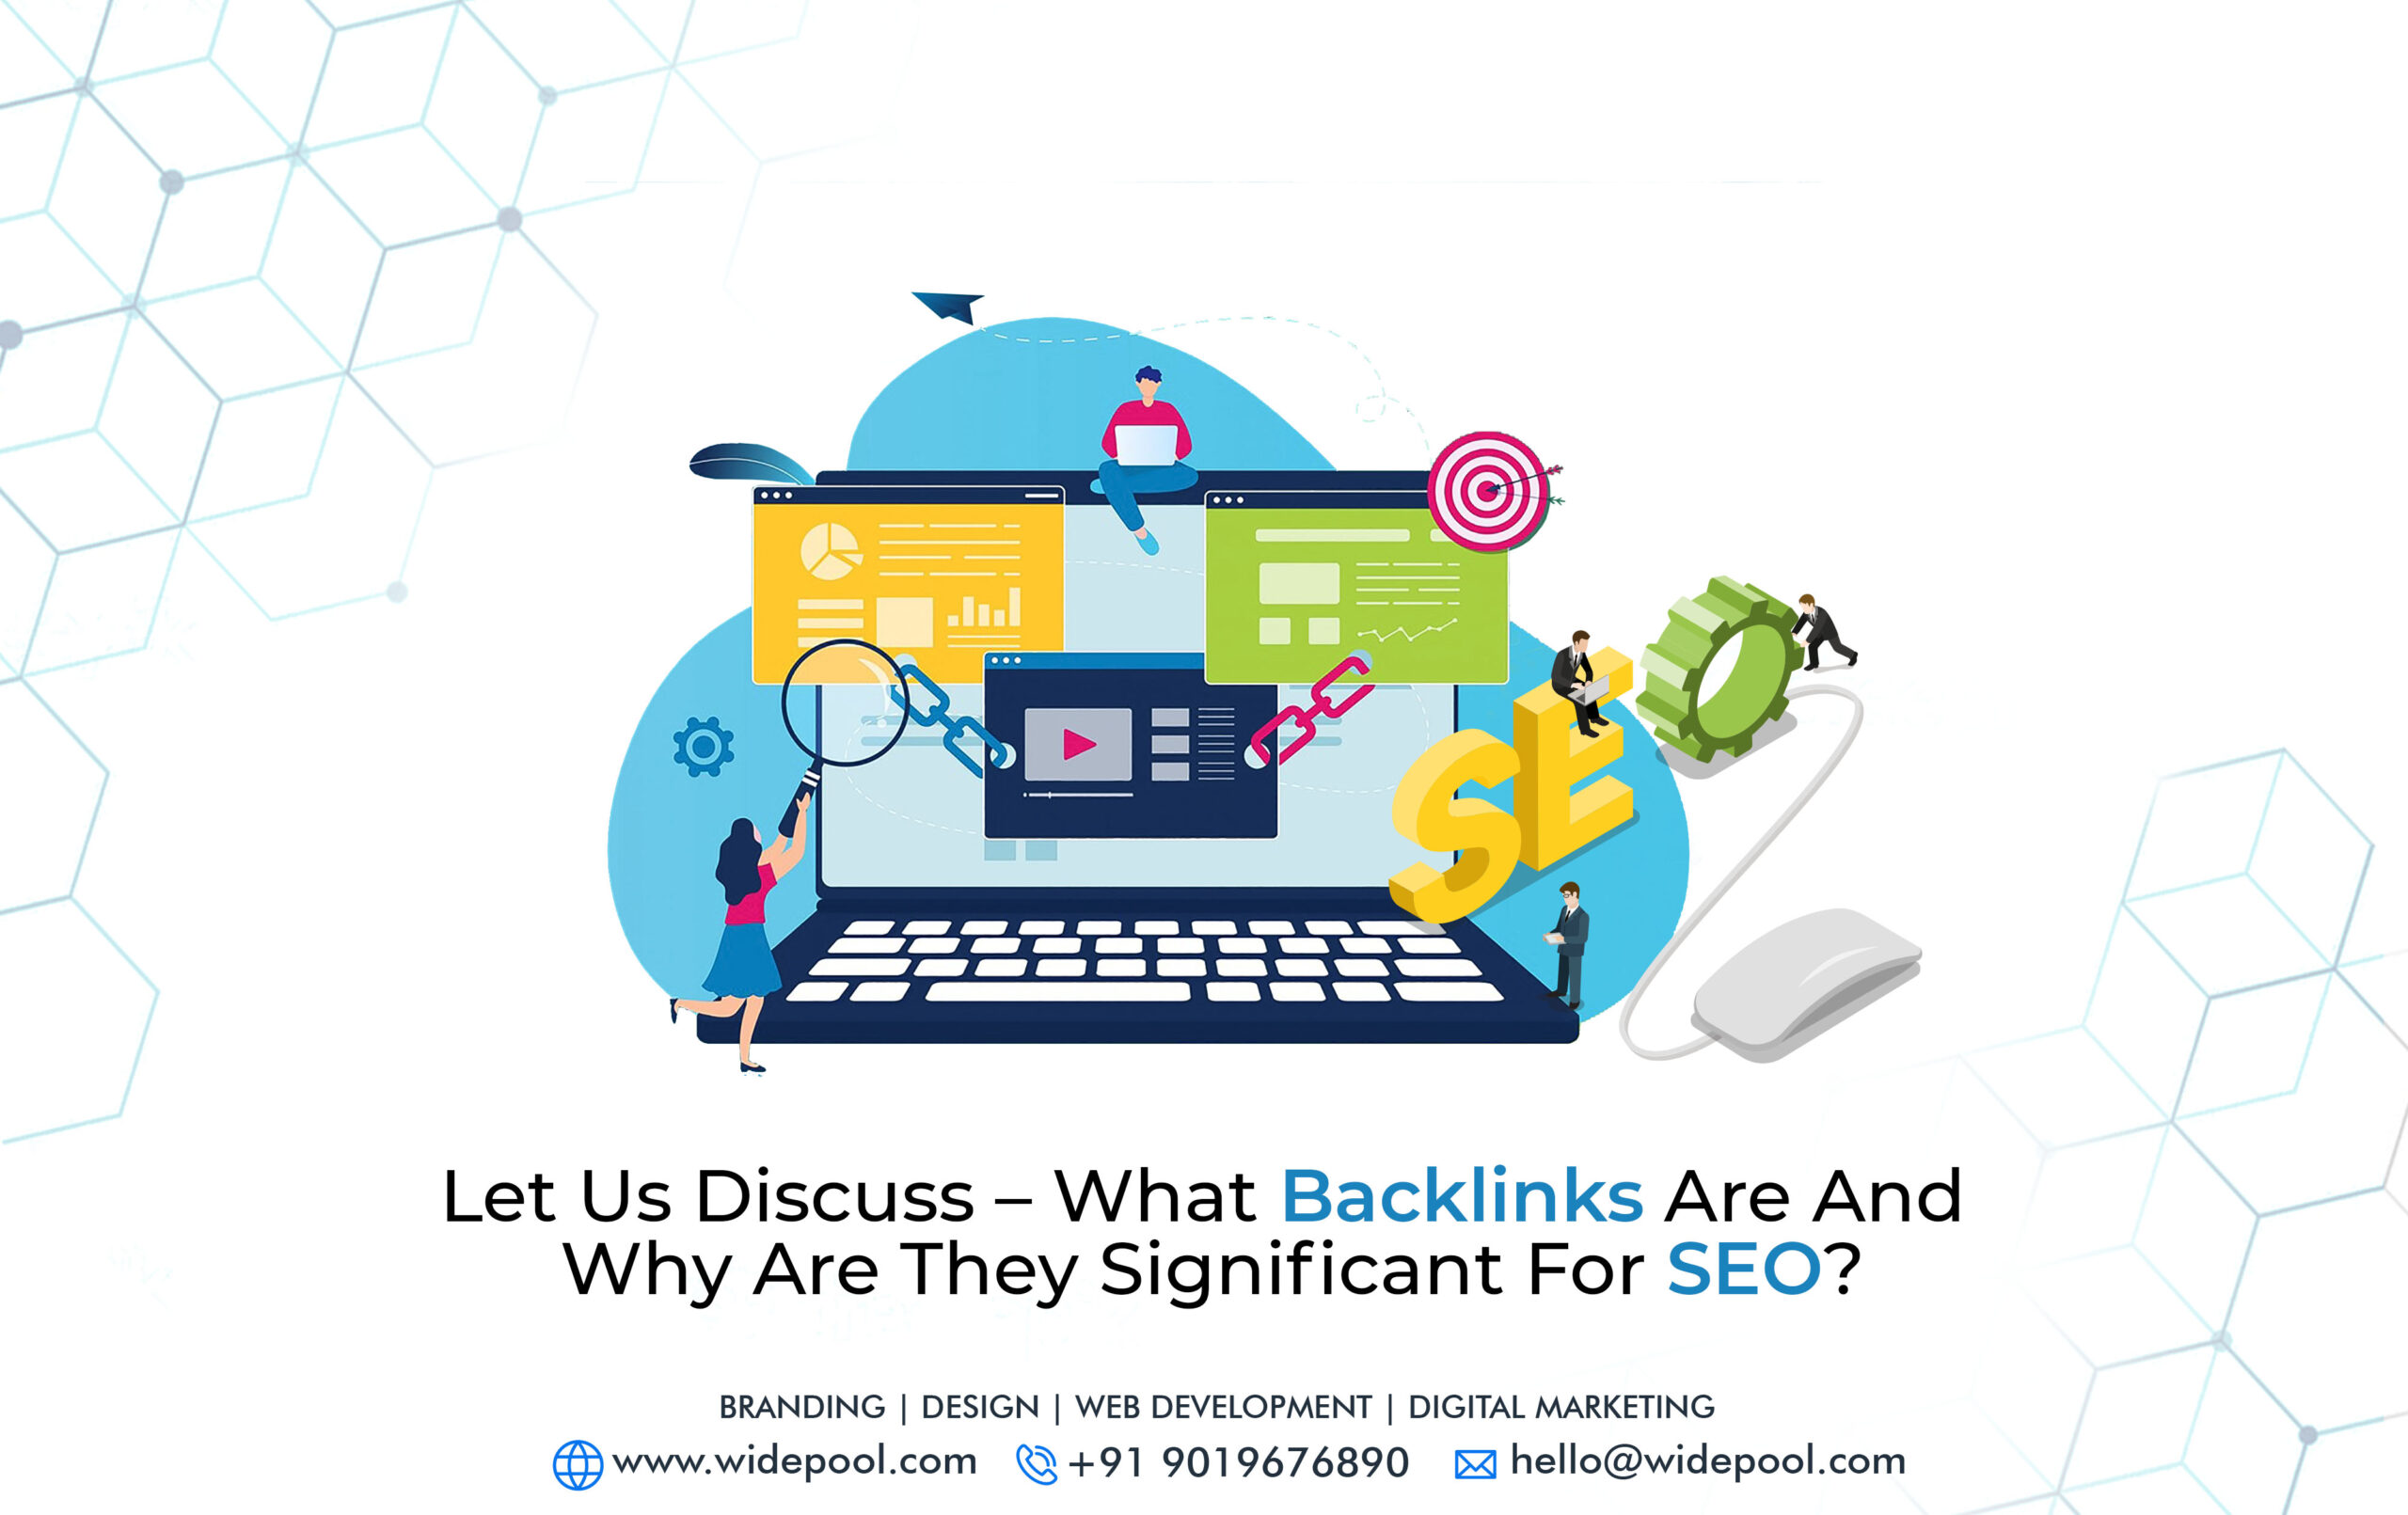 Let Us Discuss – What Backlinks Are and Why Are They Significant for SEO?